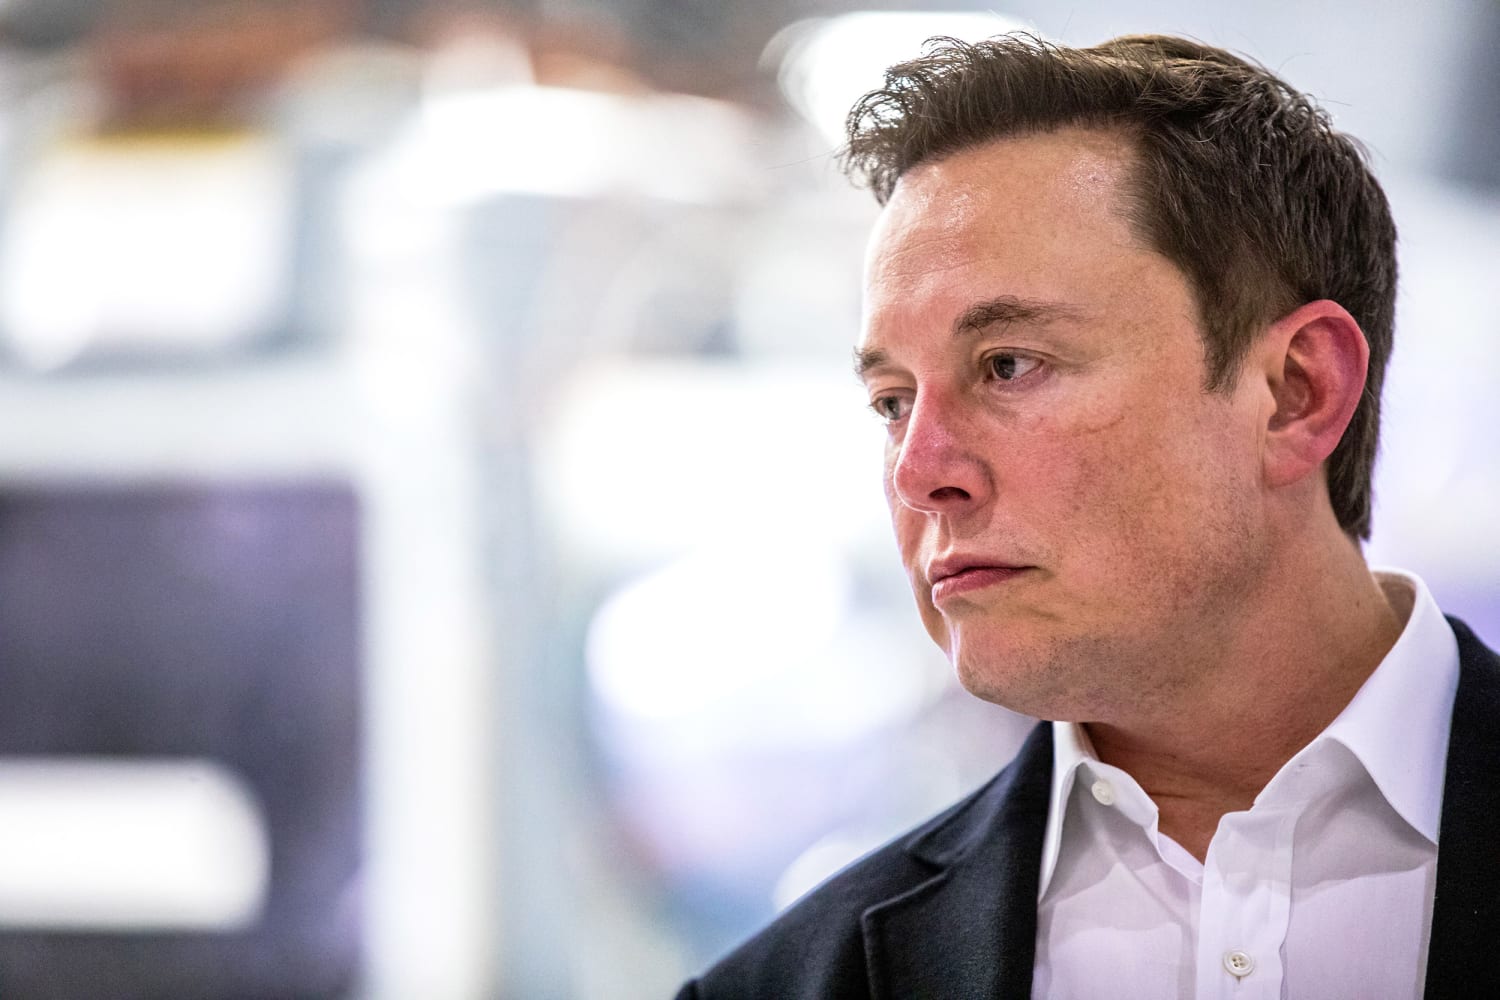 Musk fires Twitter engineers after critical posts on Twitter, Slack